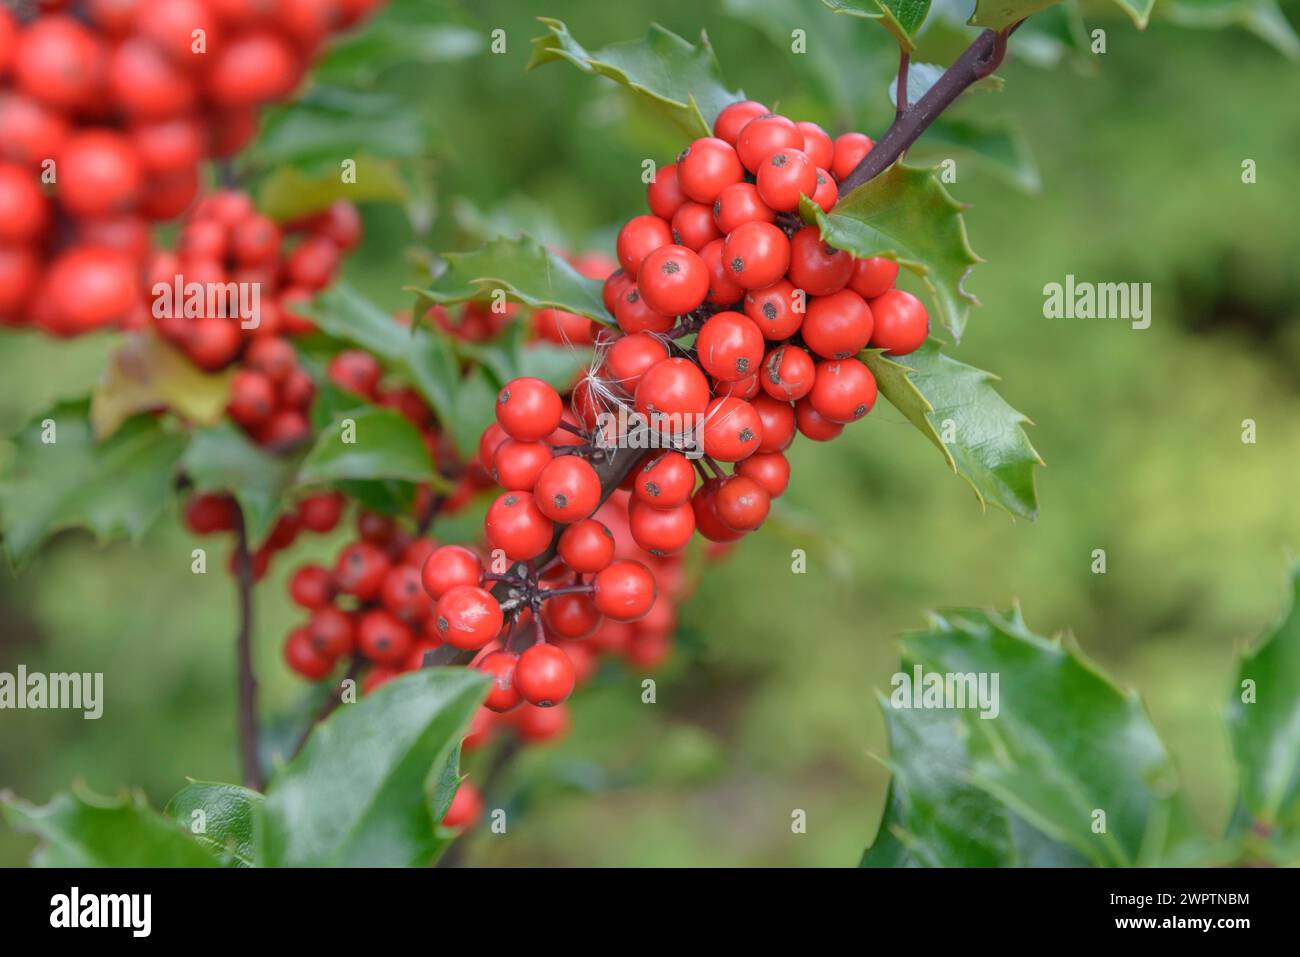 Ilex x meserveae 'Blue Princess', State Institute for Agriculture and Horticulture, Ditfurt, Saxony-Anhalt, Germany Stock Photo